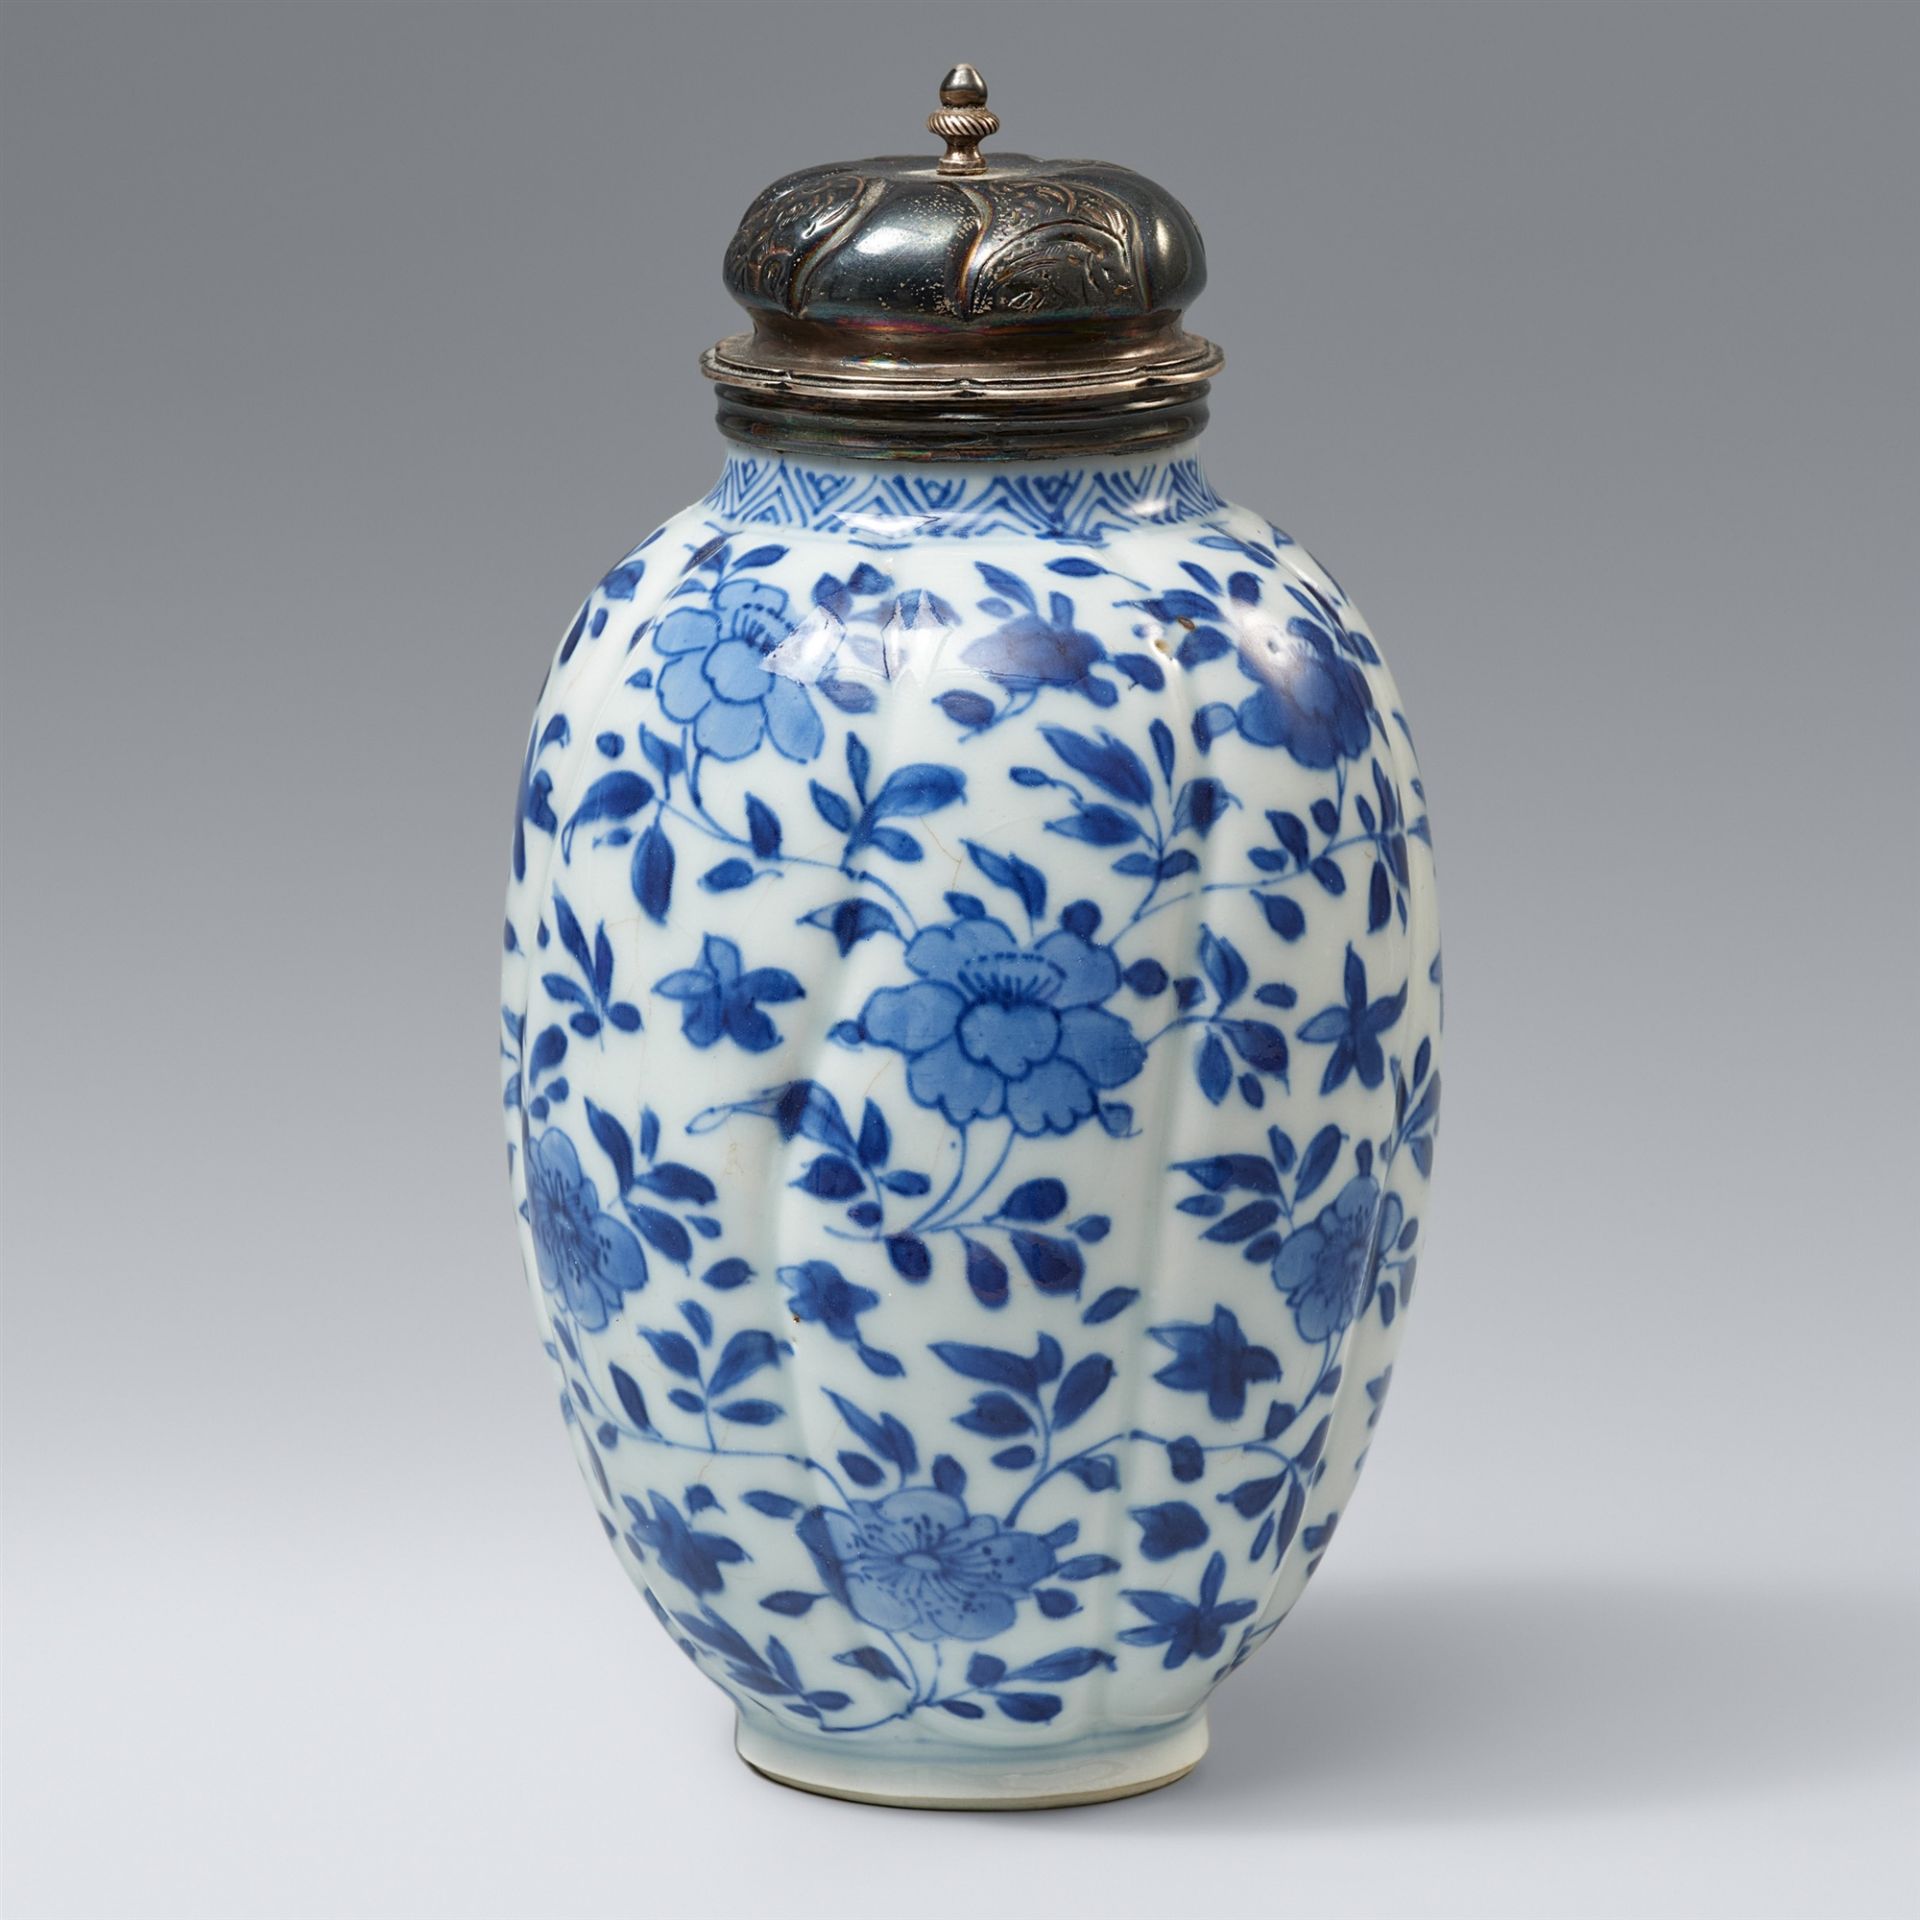 A blue and white tea caddy with silver lid. Kangxi period (1662-1722)